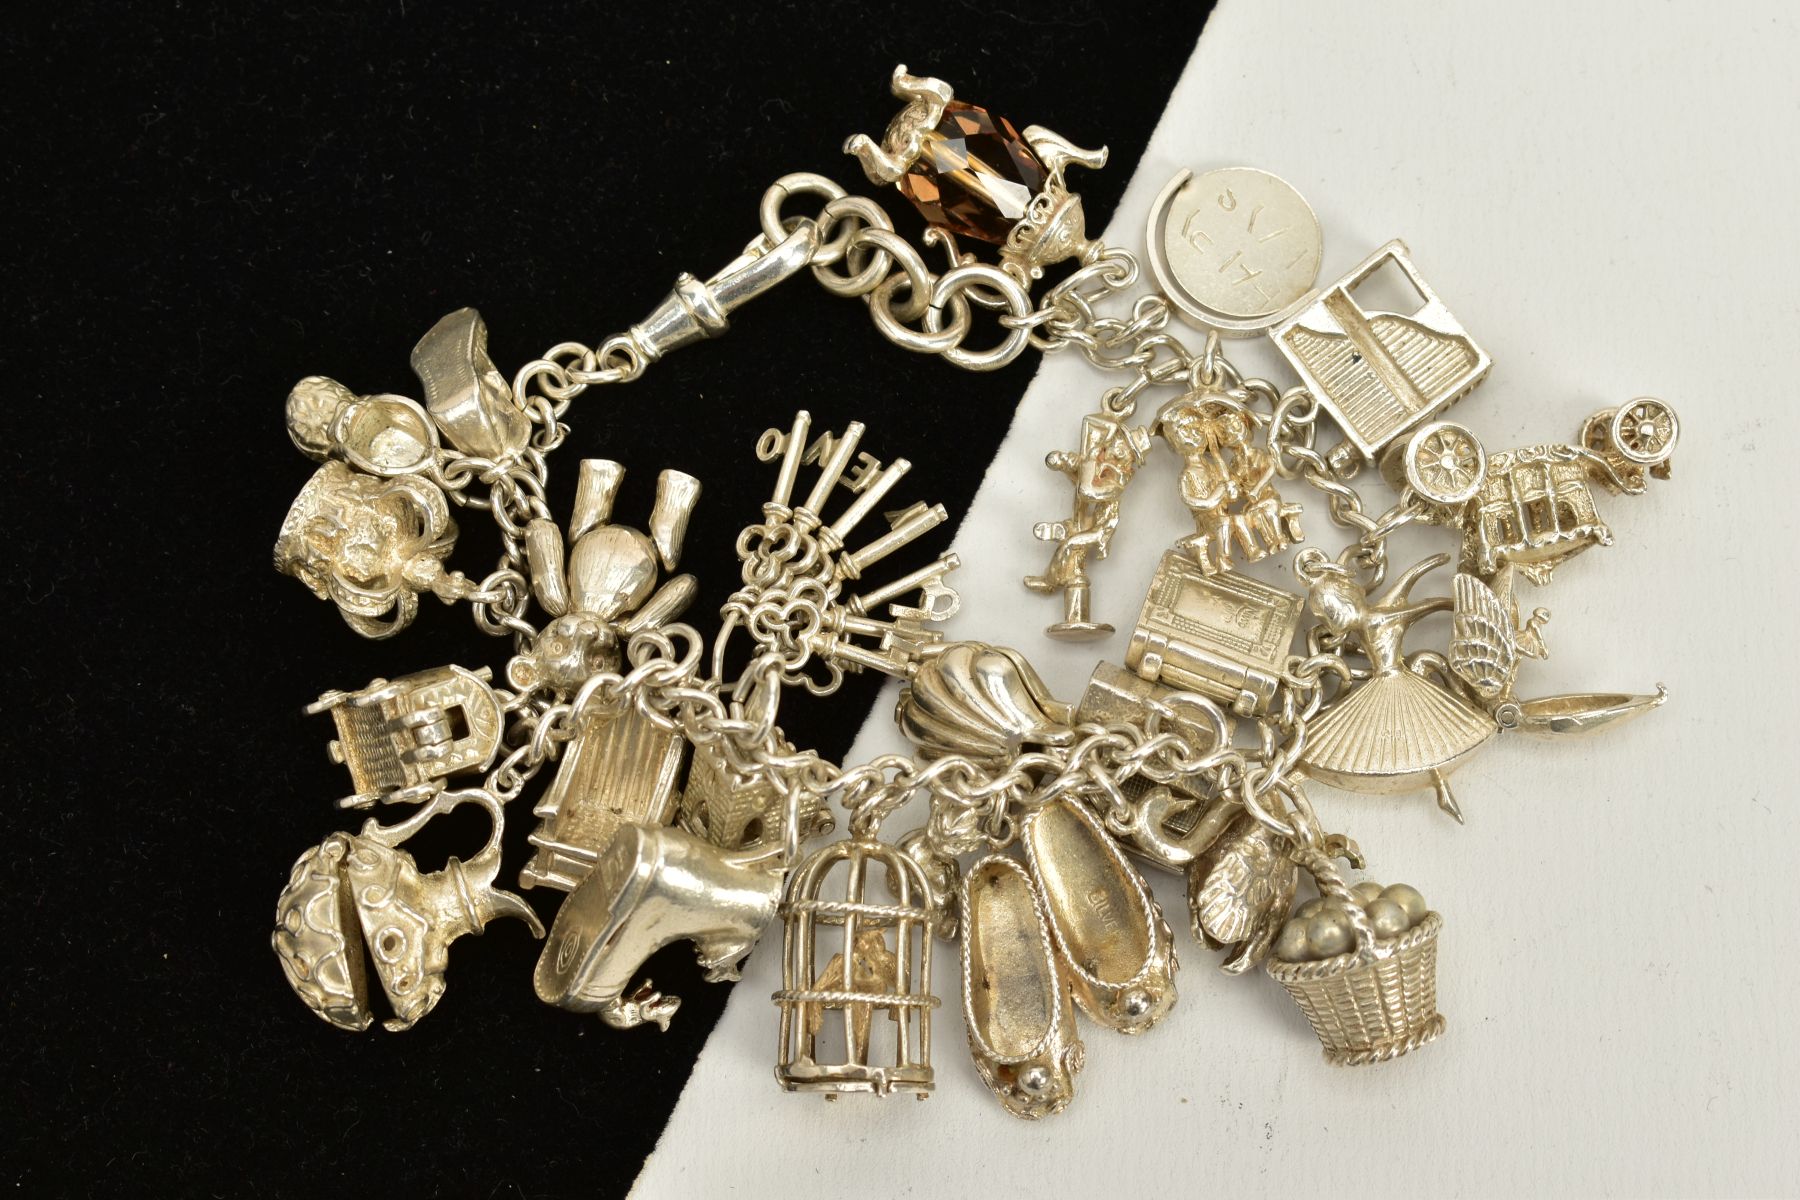 A CHARM BRACELET, suspending twenty five charms in forms such as a bird in a cage, ballerina